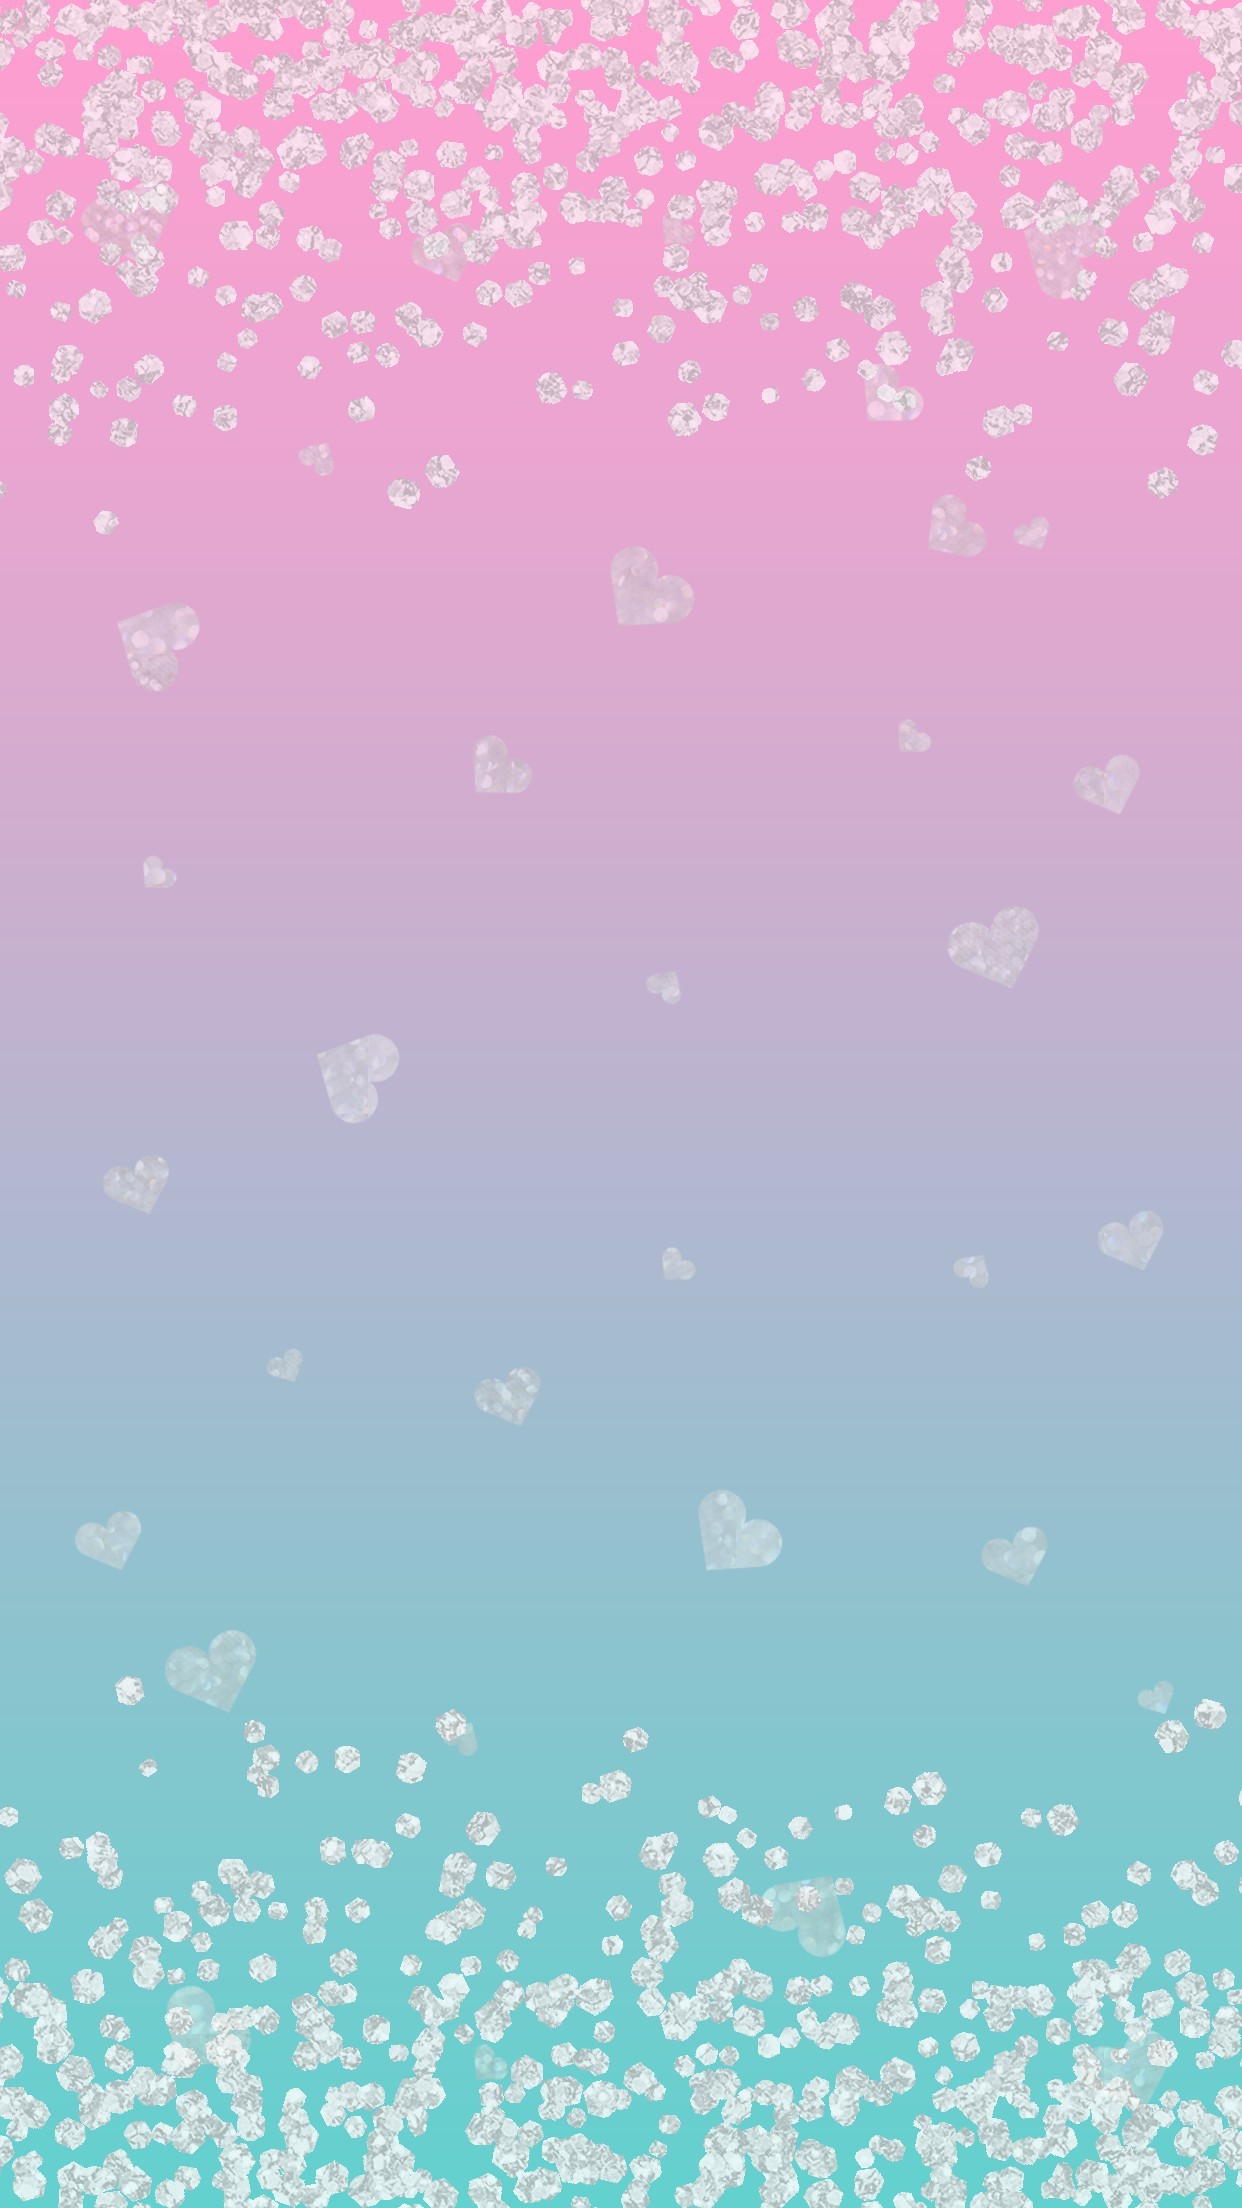 Wallpaper, background, iPhone, Android, HD, pink, blue, green,